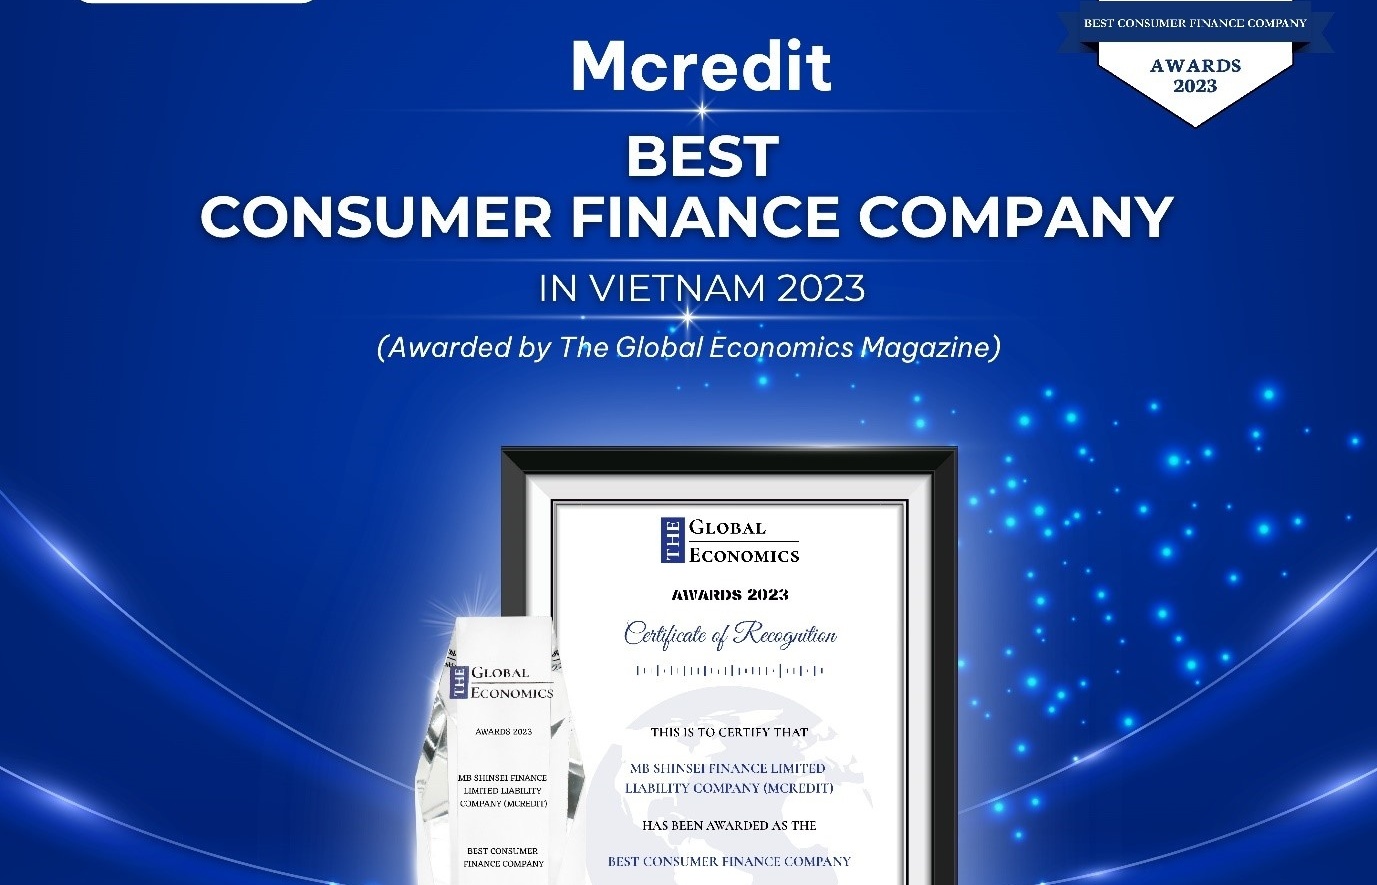 Mcredit wins 'Best Consumer Finance Company' once again